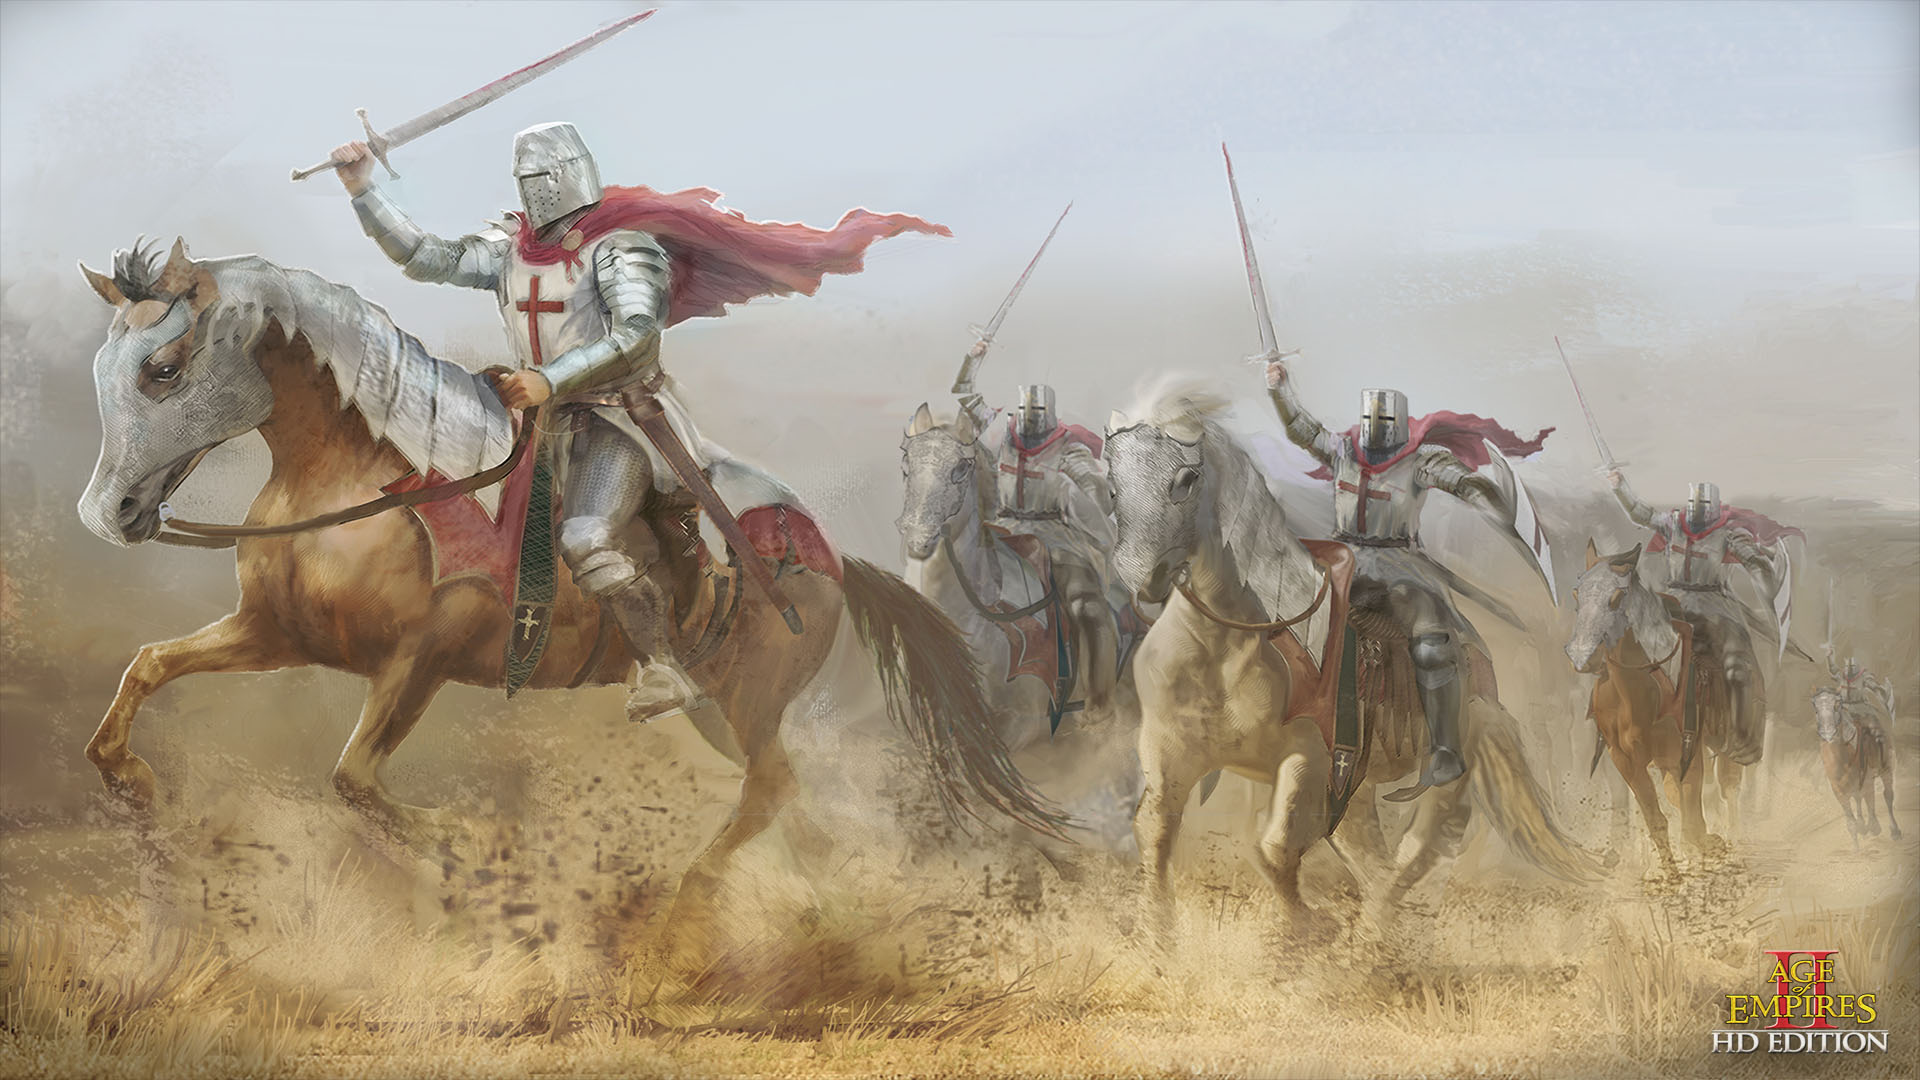 knight, Historic, History, Horse, Horse riding, Cavalry, Teutonic Order, Age Of Empires, Video games Wallpaper